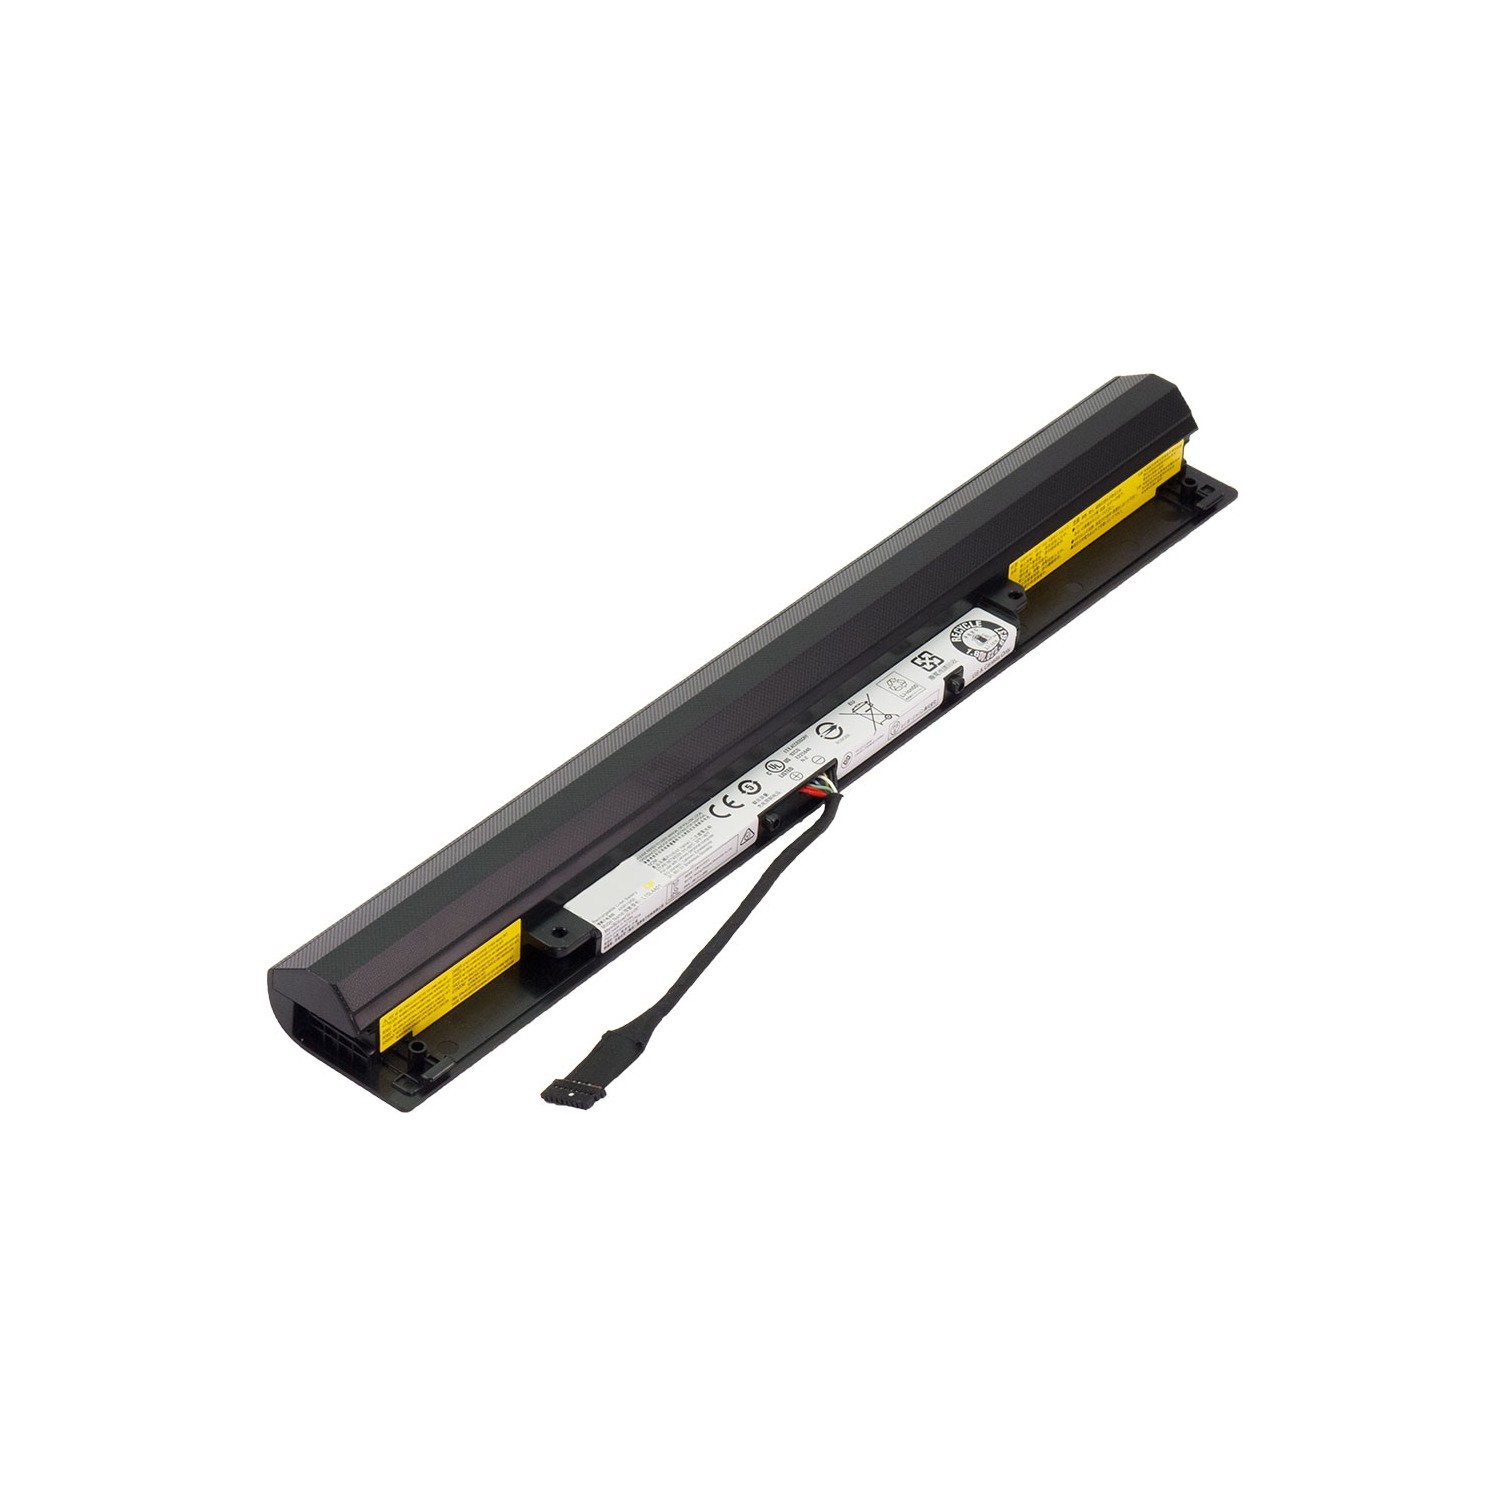 Laptop Battery Replacement for Lenovo IdeaPad 100-15IBD 80MJ, 41NR19/65, L15L4A01